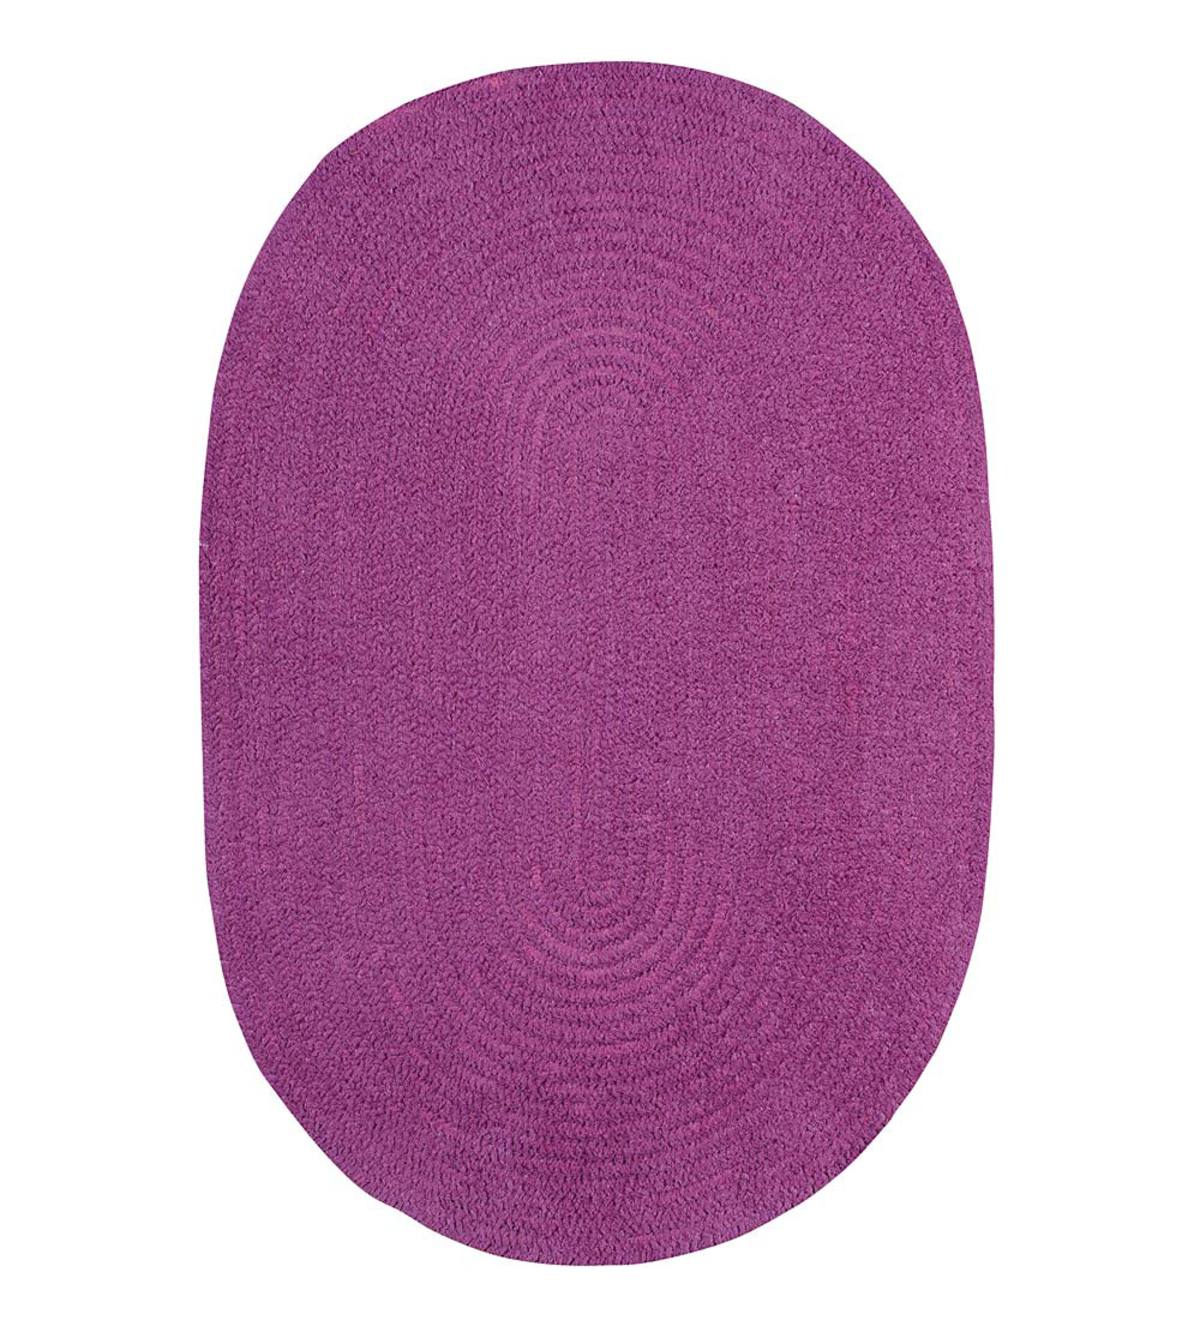 Chenille Oval Braided Area Rug, 5' x 8' - Wildberry